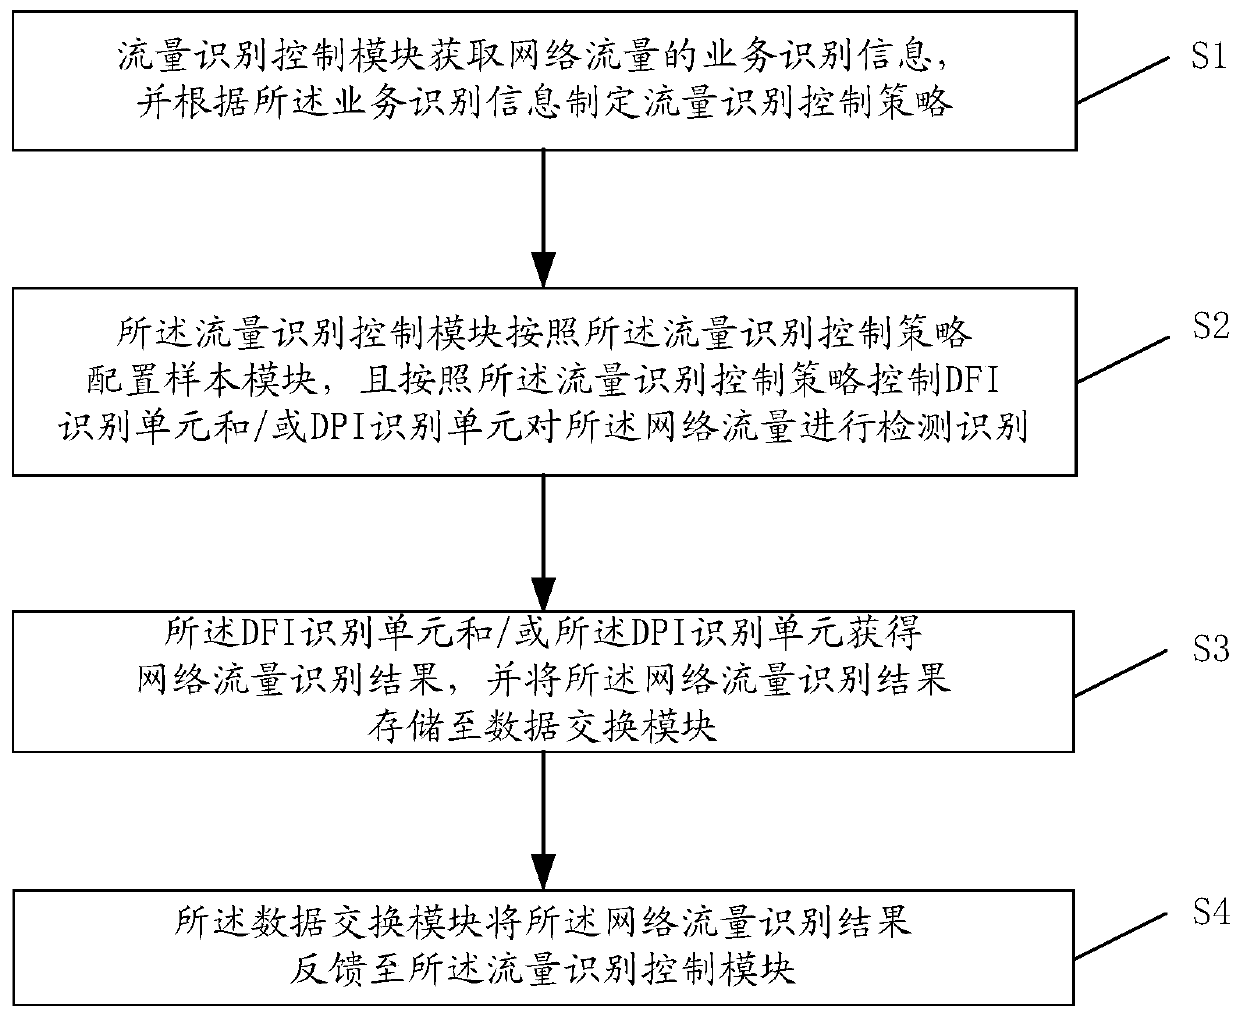 A network traffic control method and control system based on dfi and dpi